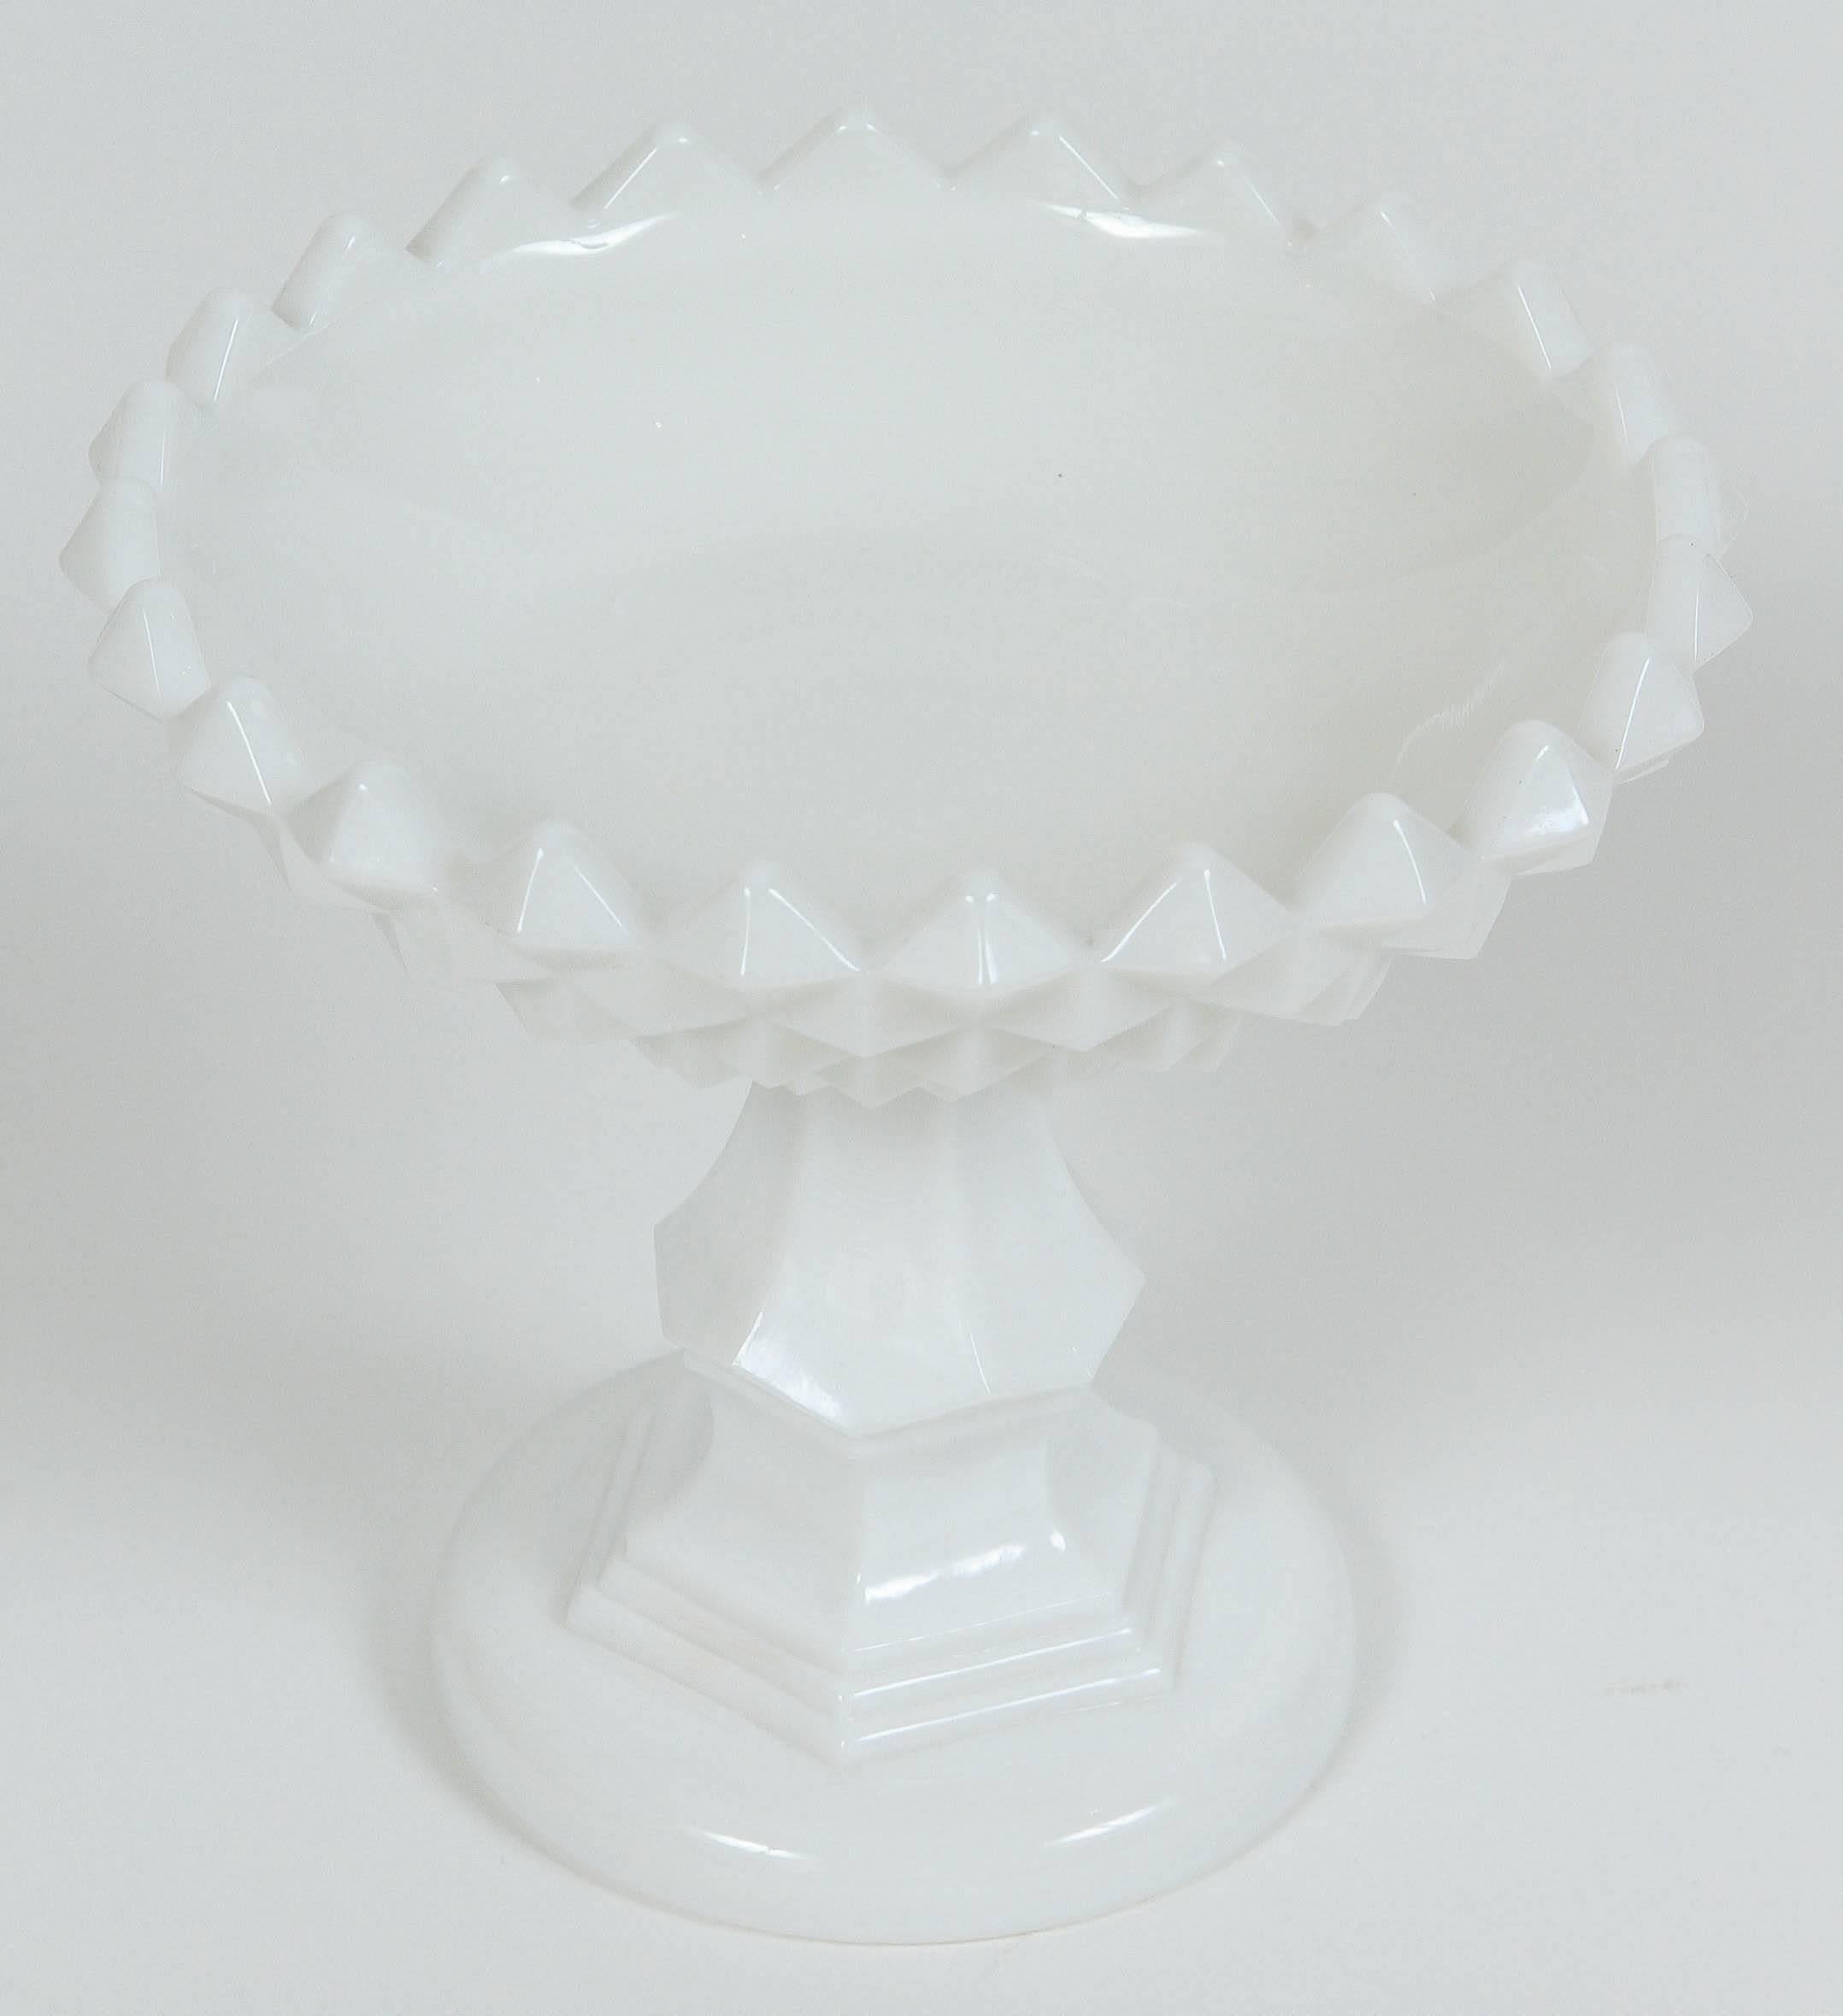 Mid-20th Century Vintage Small Footed Milk Glass Compote with Lid